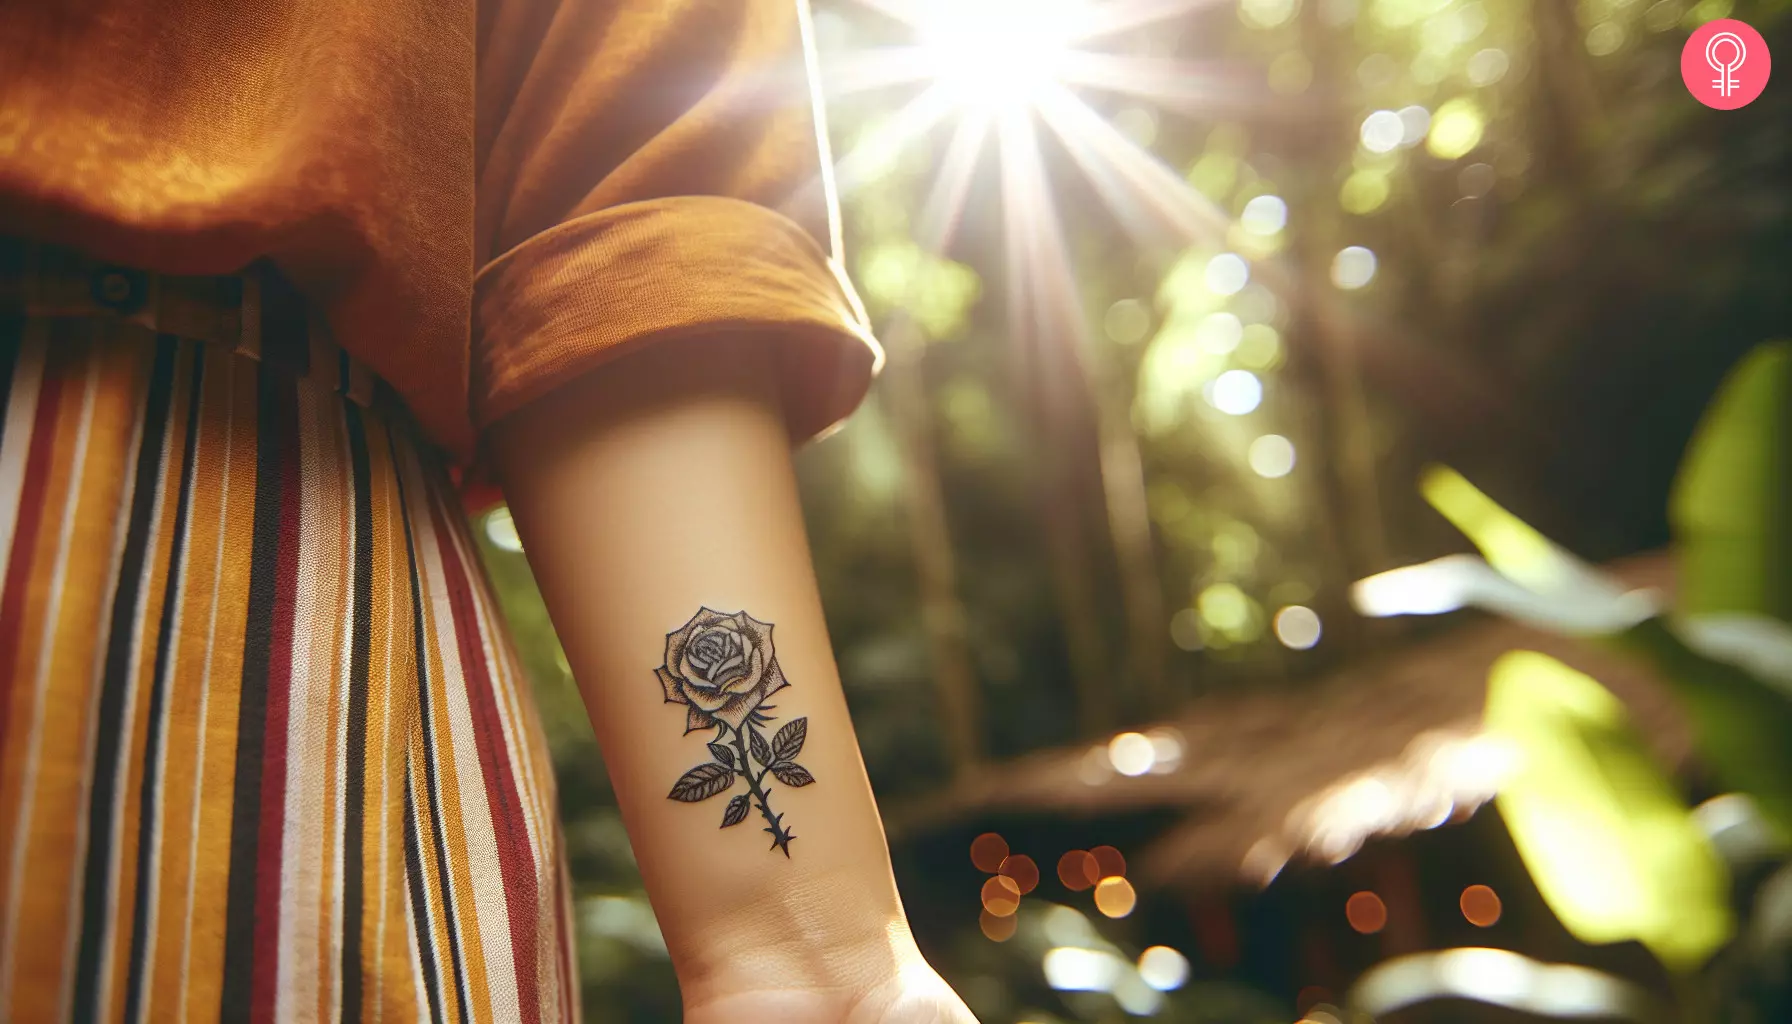 A small rose with thorns tattoo on the wrist